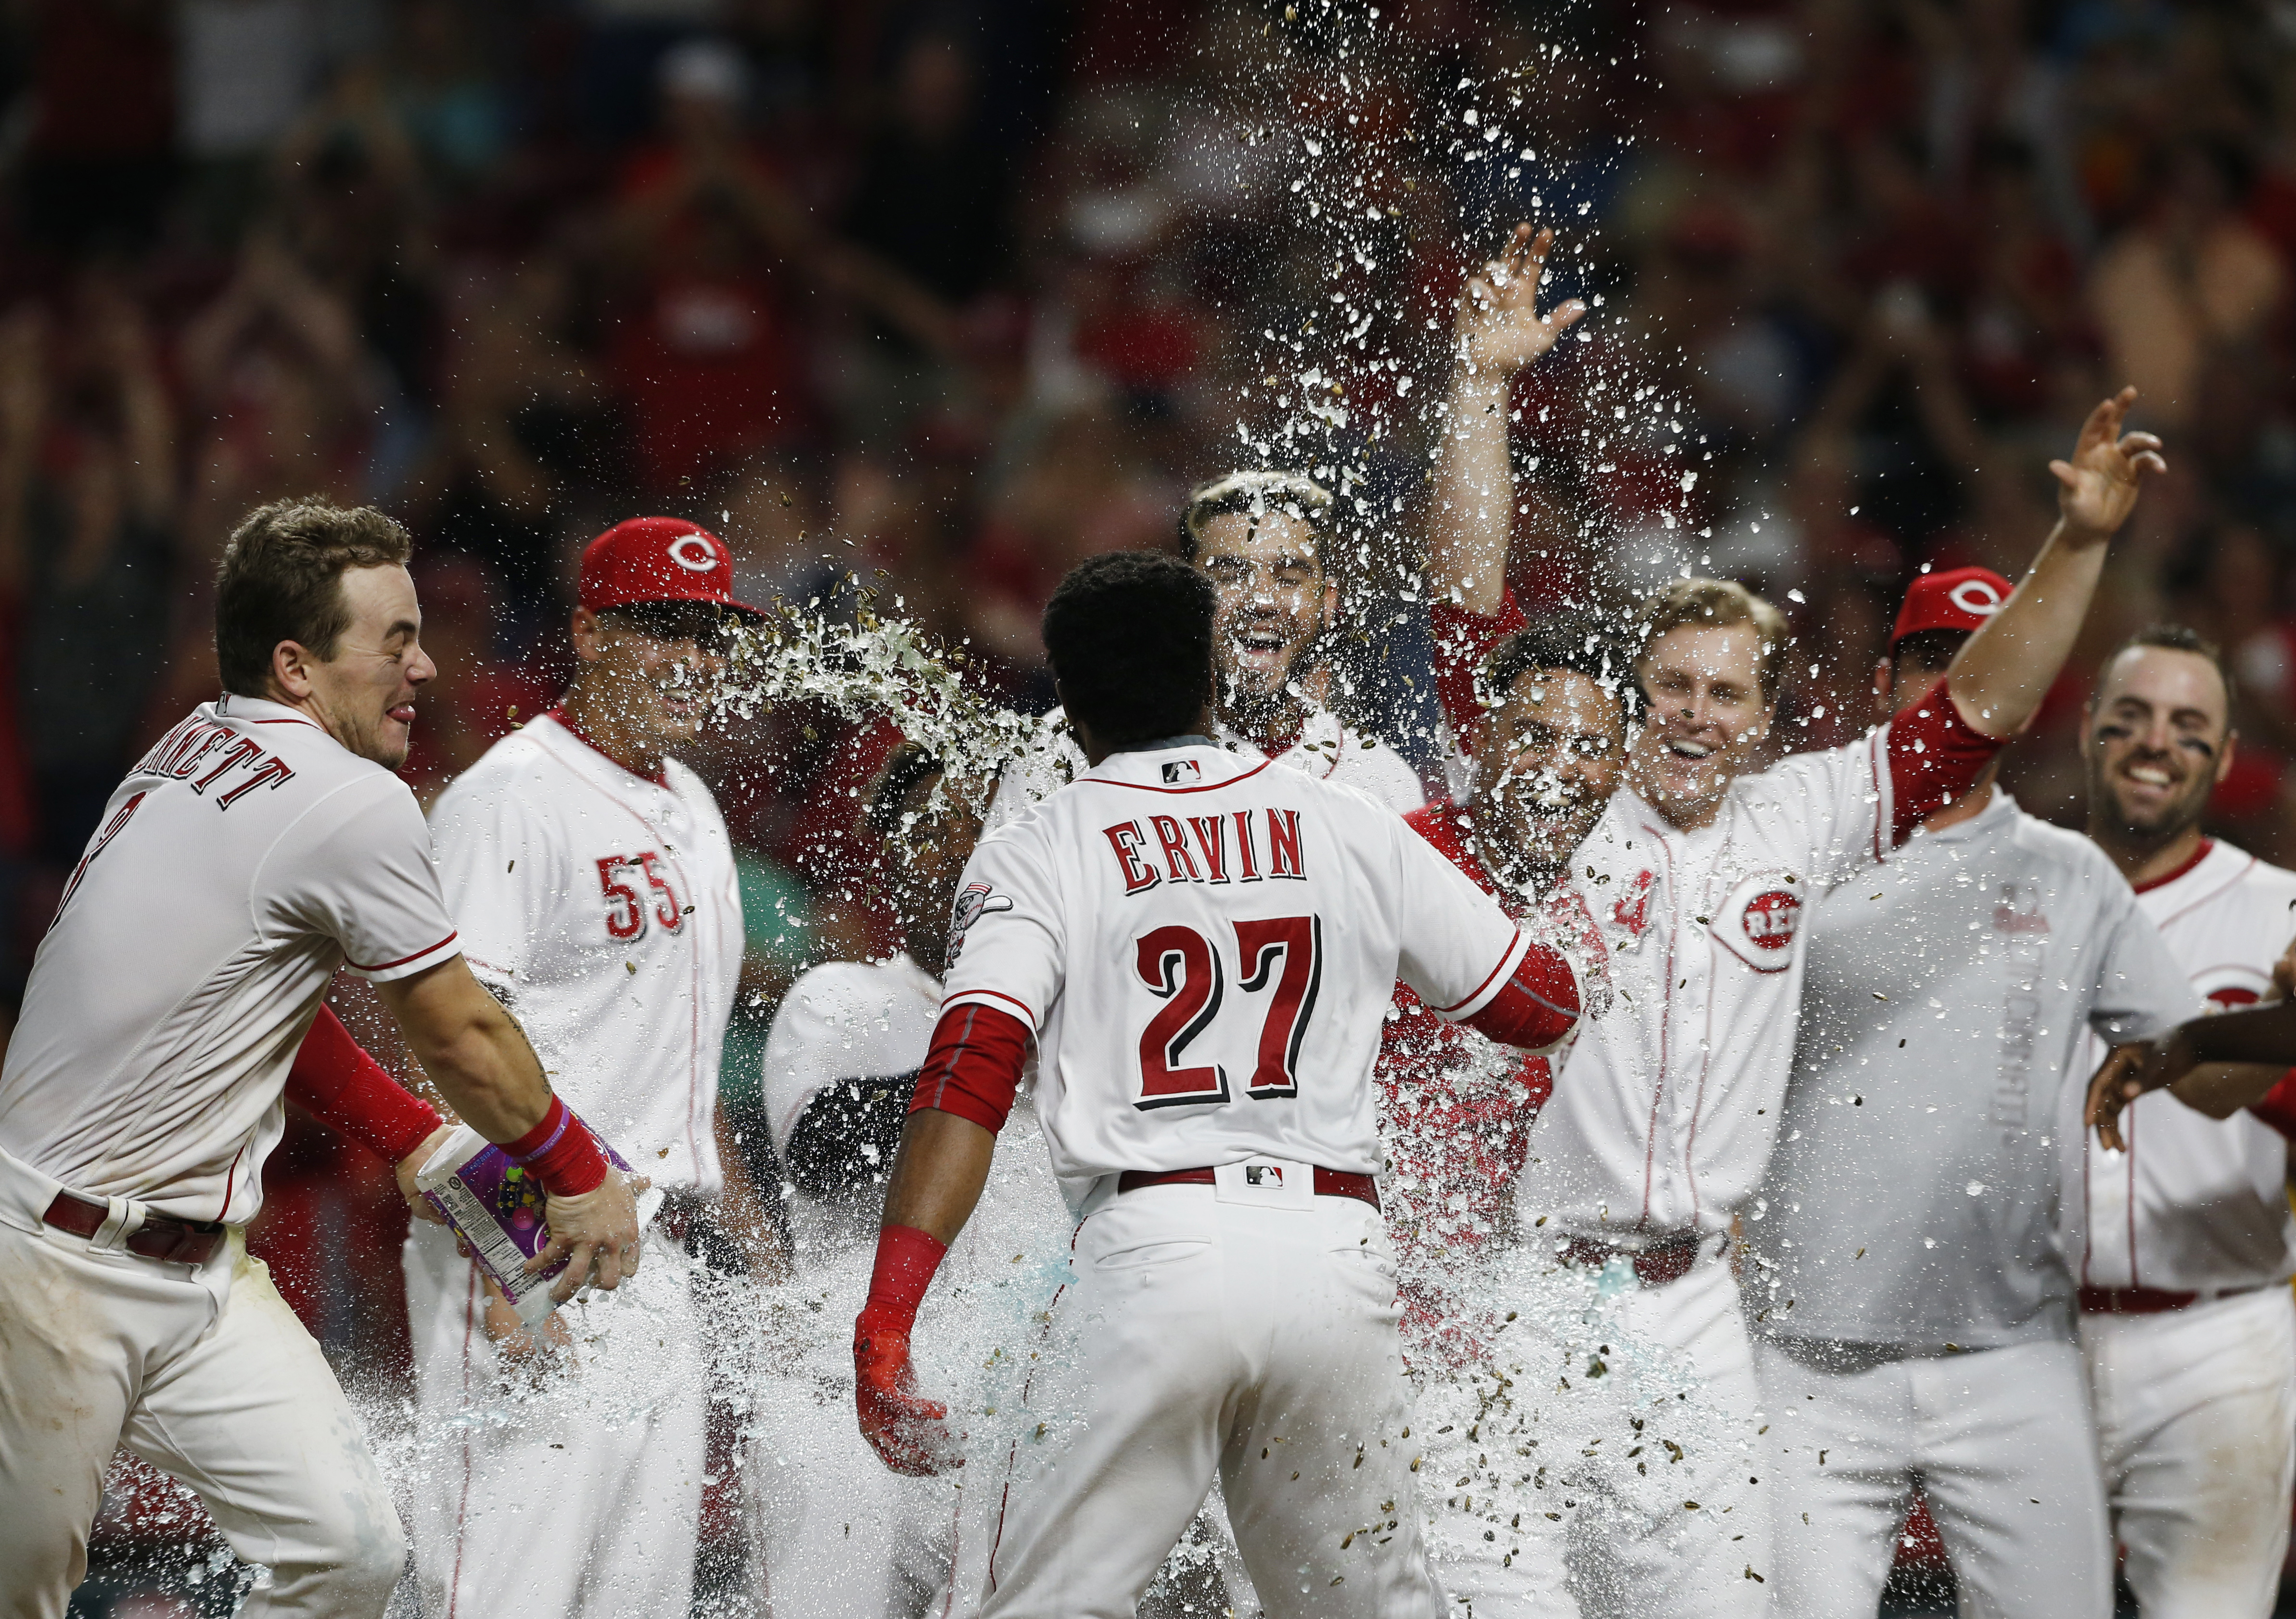 Ervin’s leadoff home run in 11th lifts Reds over Giants 2-1